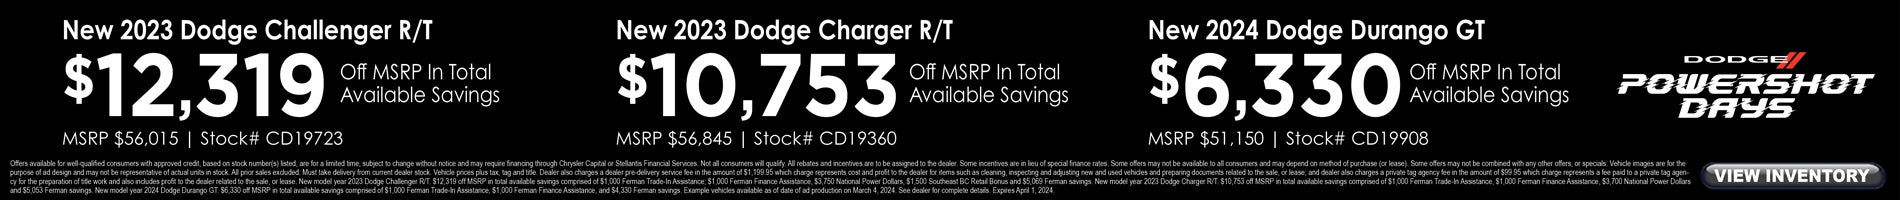 March Savings on New Dodge Challenger, Charger and Durango